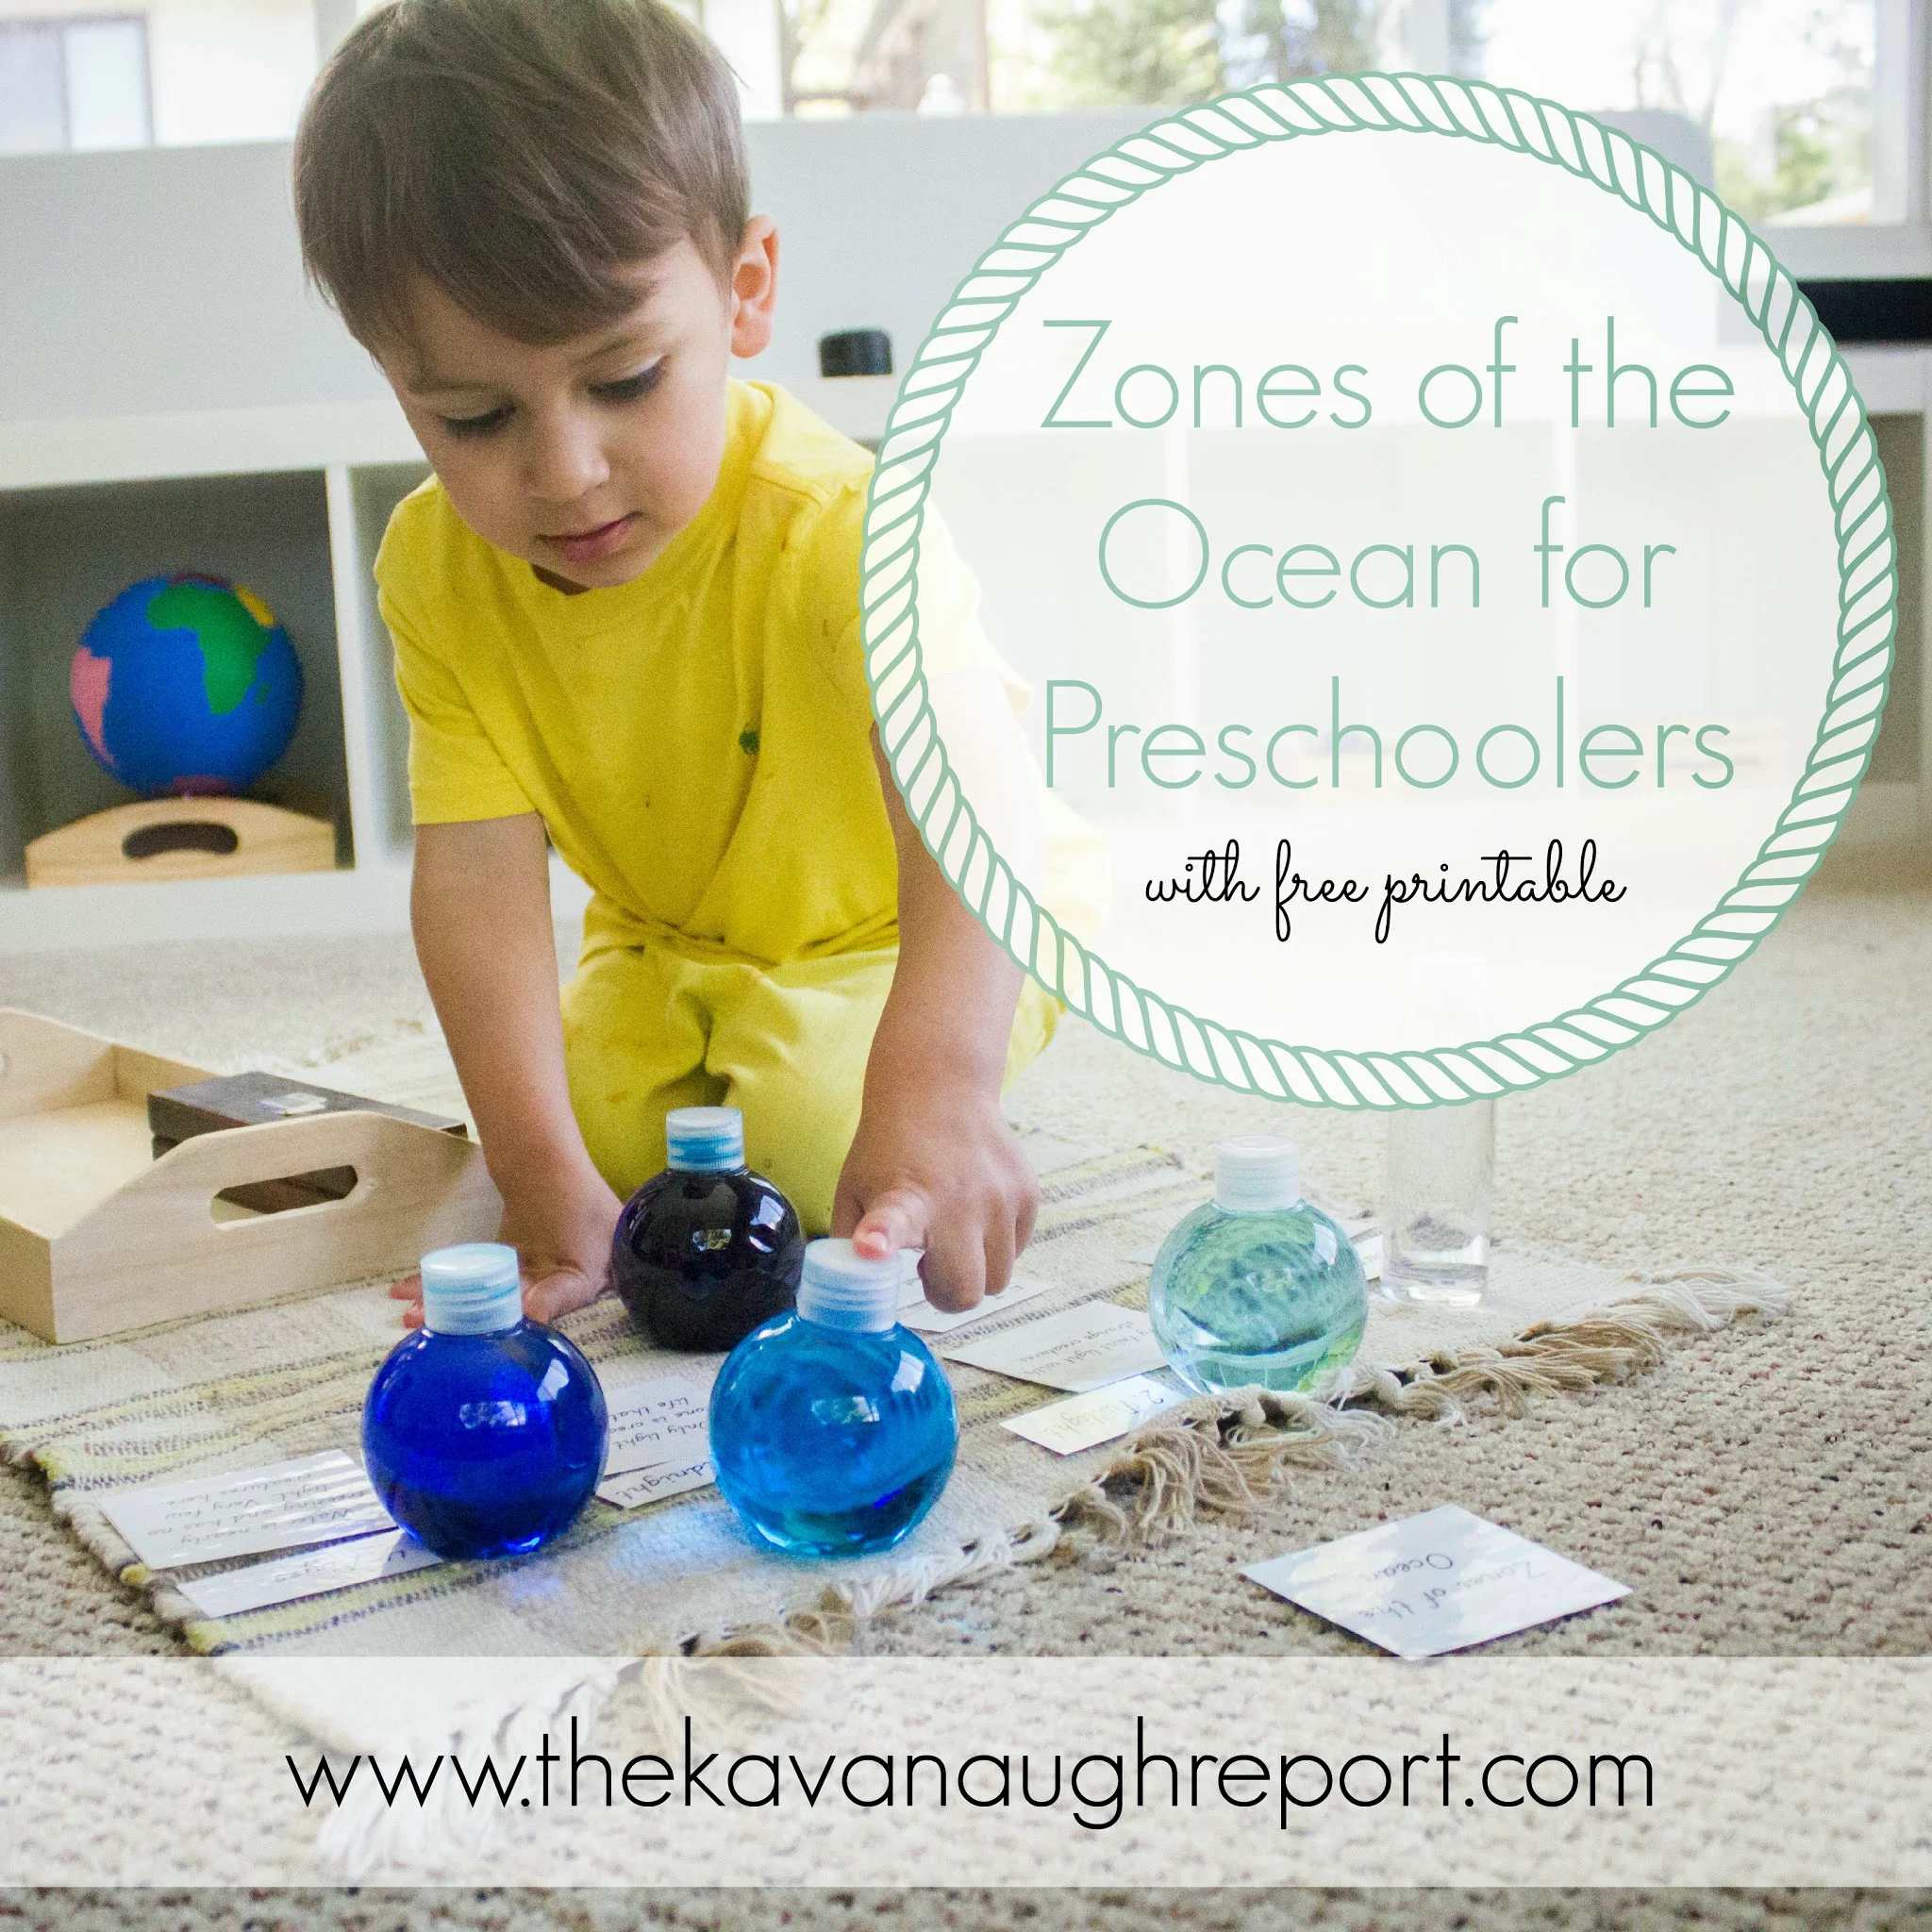 Small sensory bottles are the perfect way to explore the zones of the ocean with preschoolers! These easy DIY bottles with free printable, make this concept concrete and fun for kids of all ages!